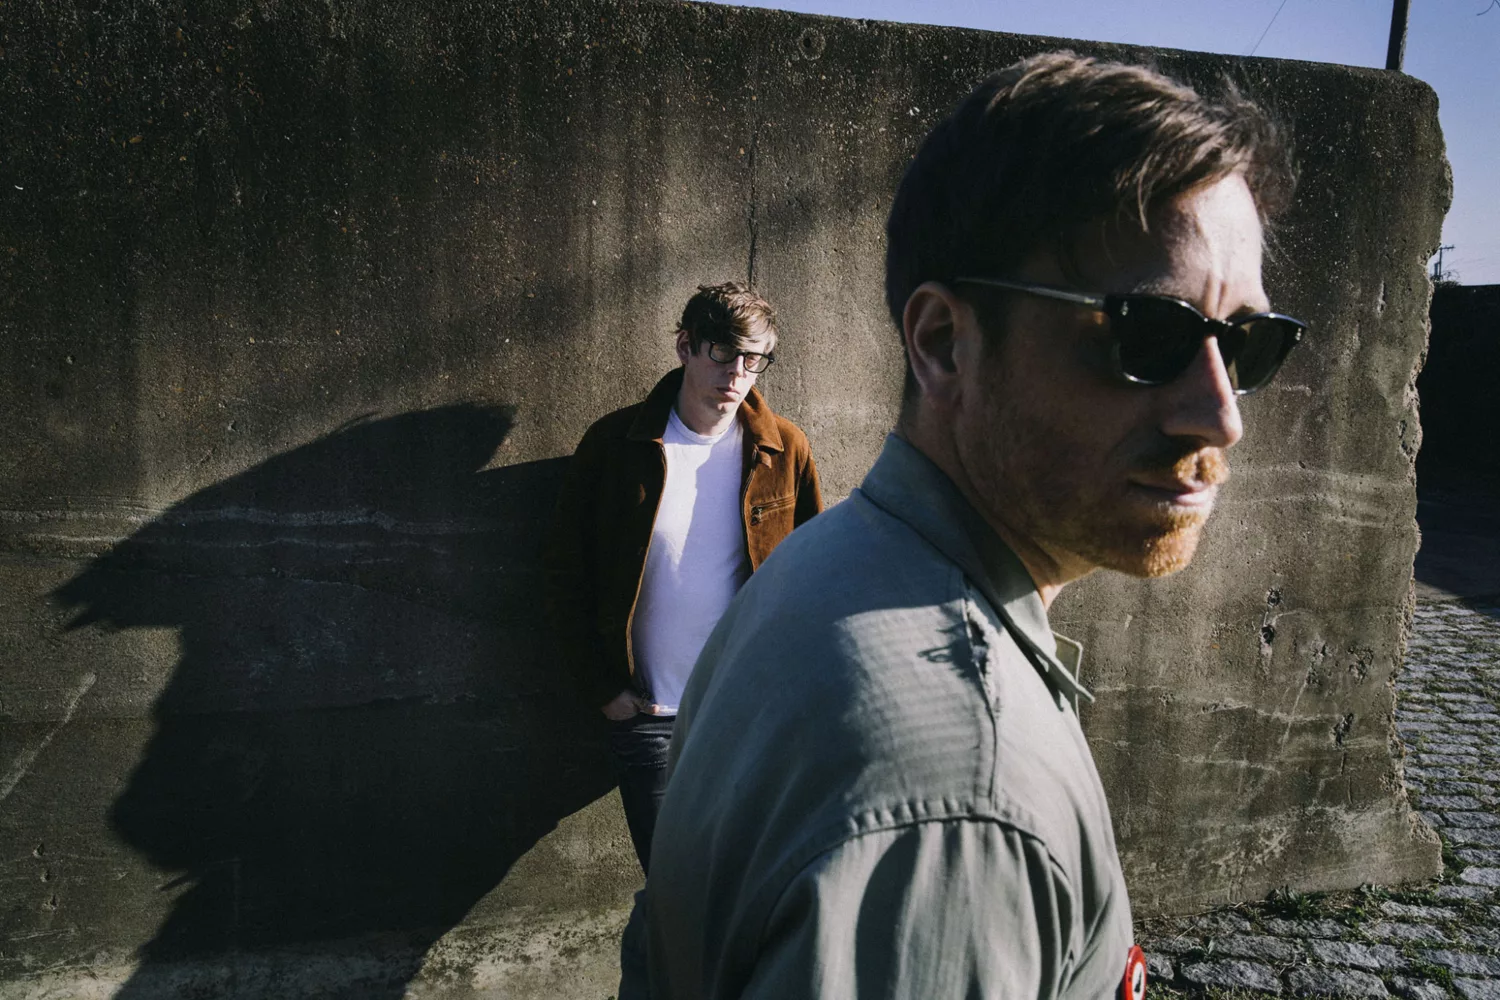 The Black Keys and The Prodigy to co-headline Friday at Isle of Wight 2015